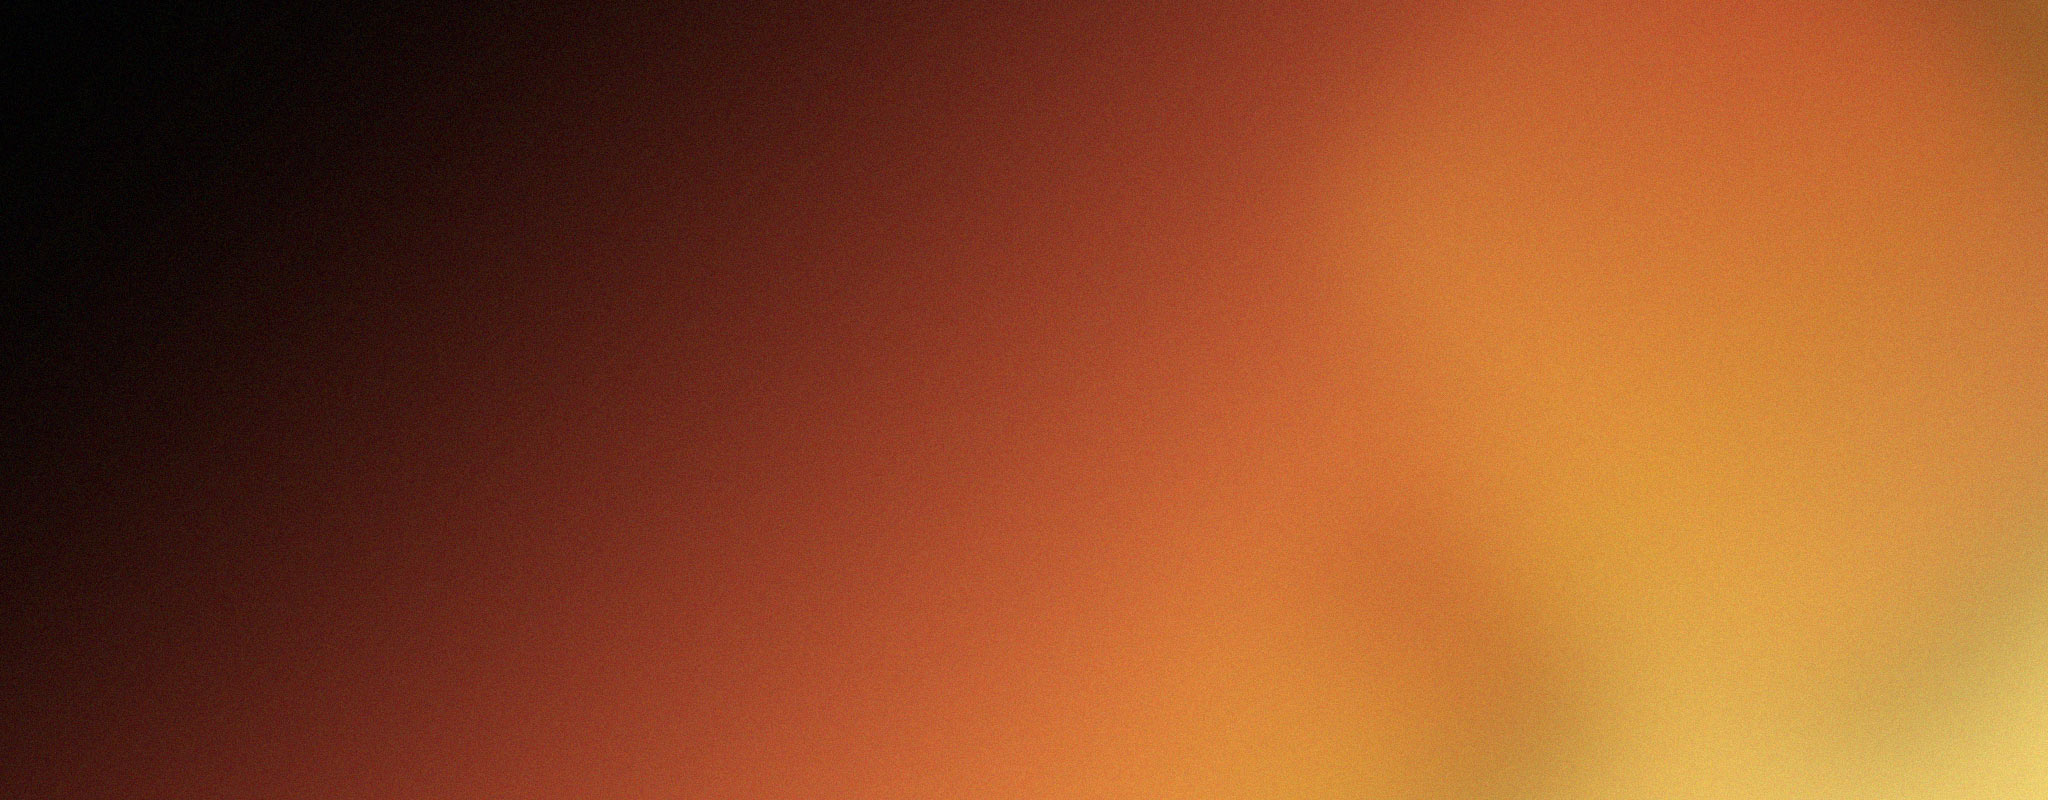 A blurred gradient of colors ranging from dark brown and red on the left, transitioning to orange and yellow on the right.